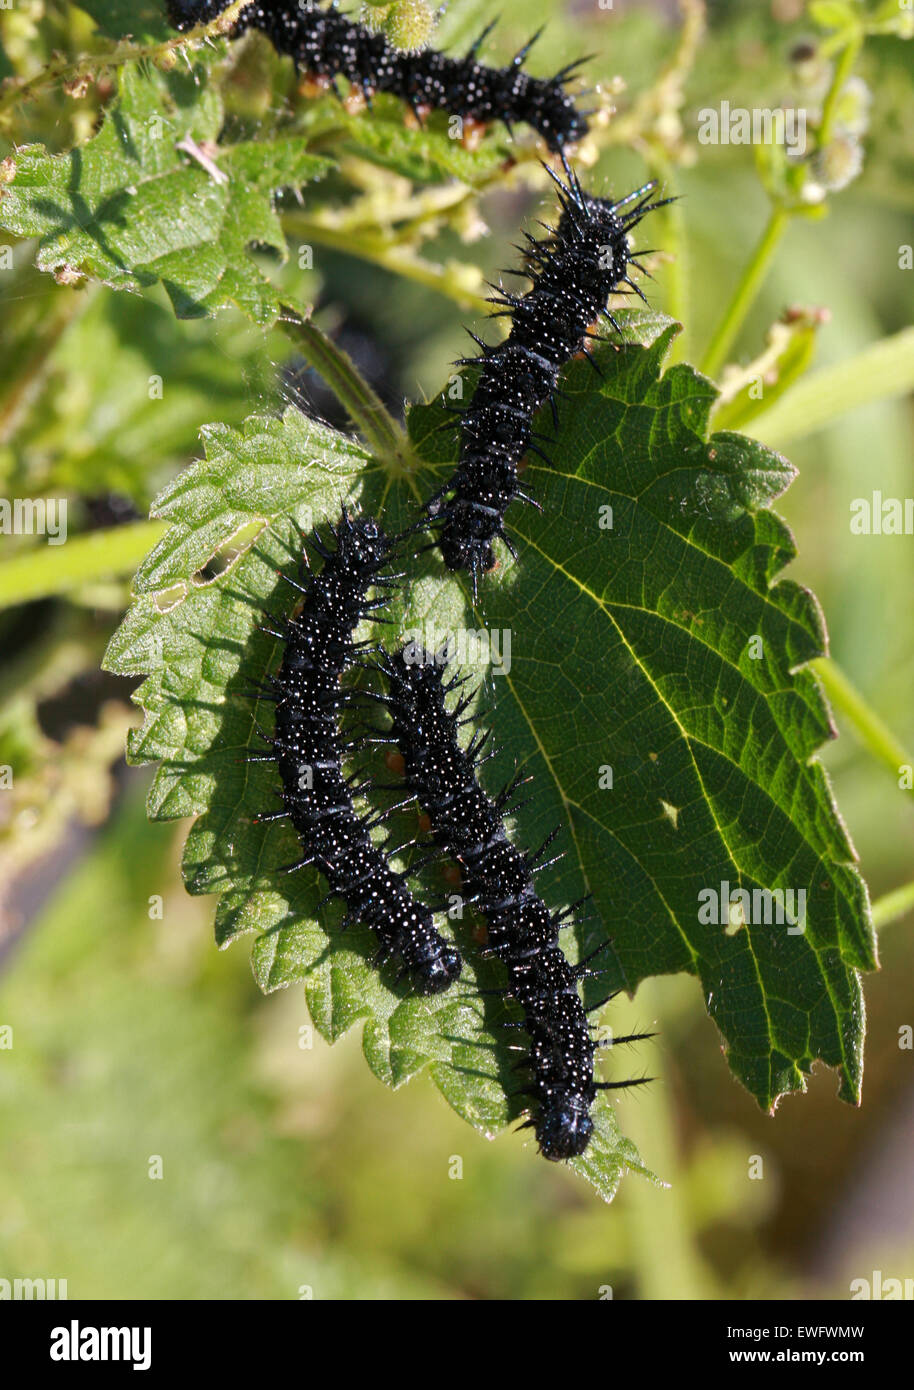 Peacock Butterfly Caterpillars, Inachis io, Nymphalidae, Feeding on Stinging Nettles, Urtica dioica. Stock Photo